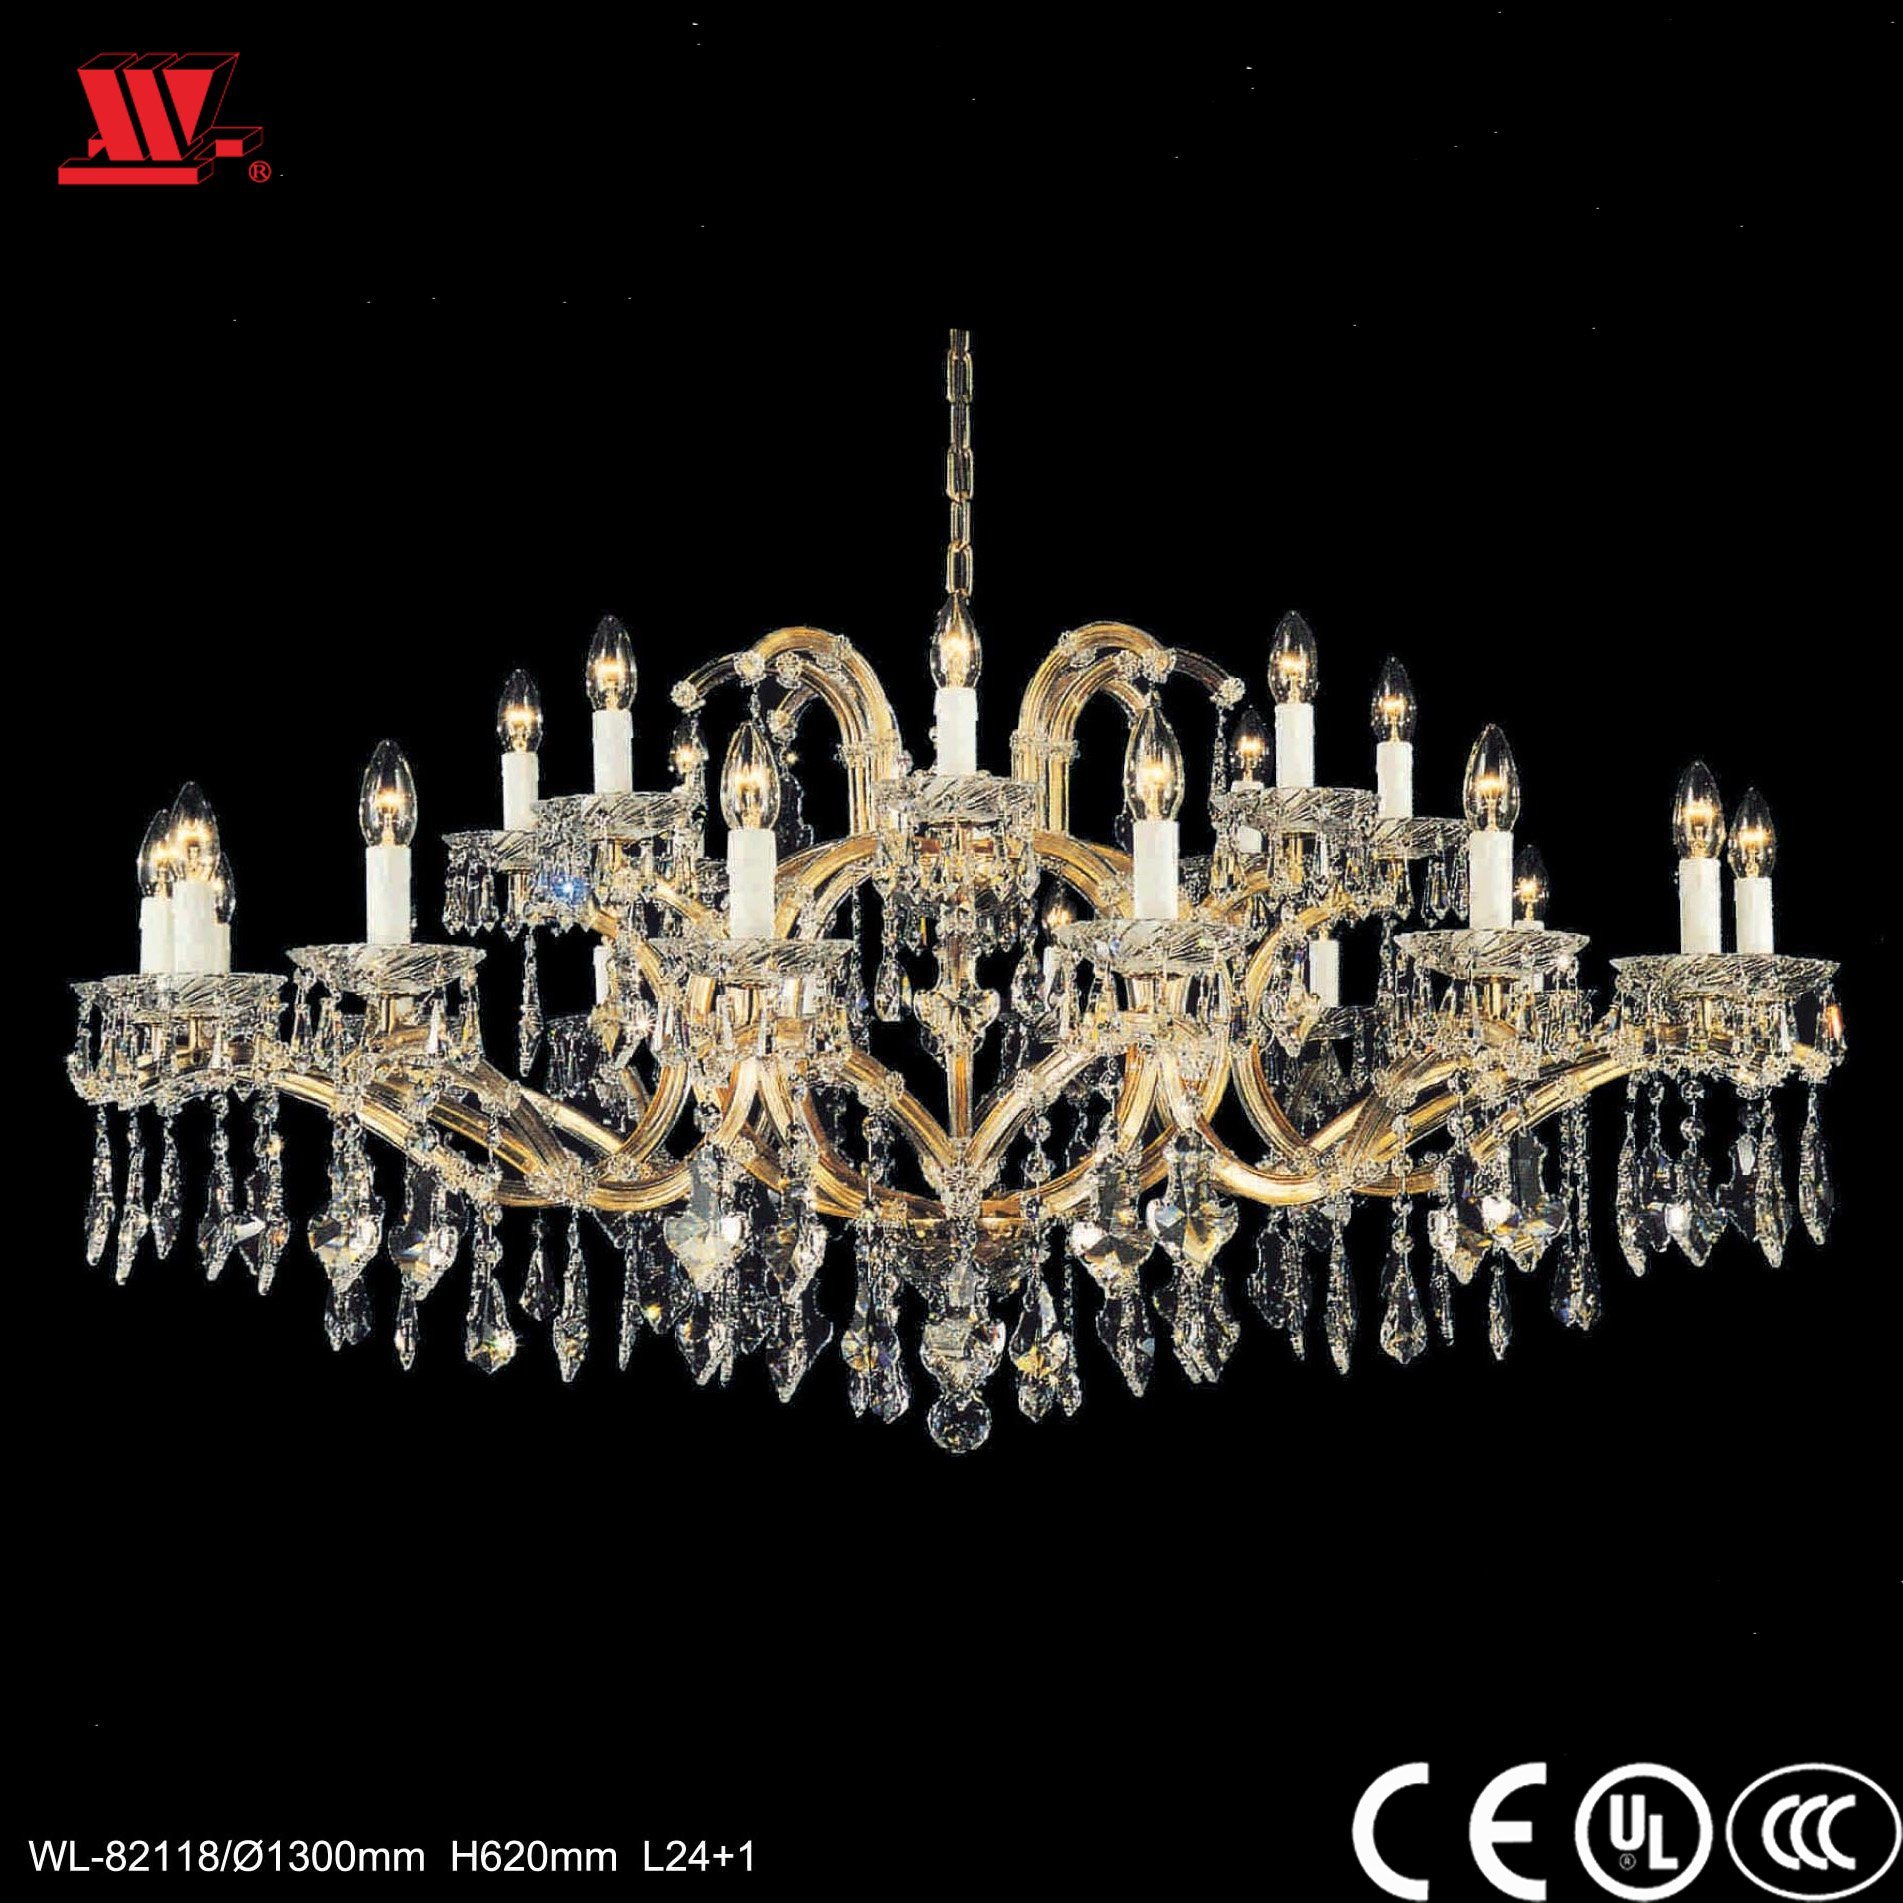 Traditional Crystal Chandelier with Glass Chains Wl-82118